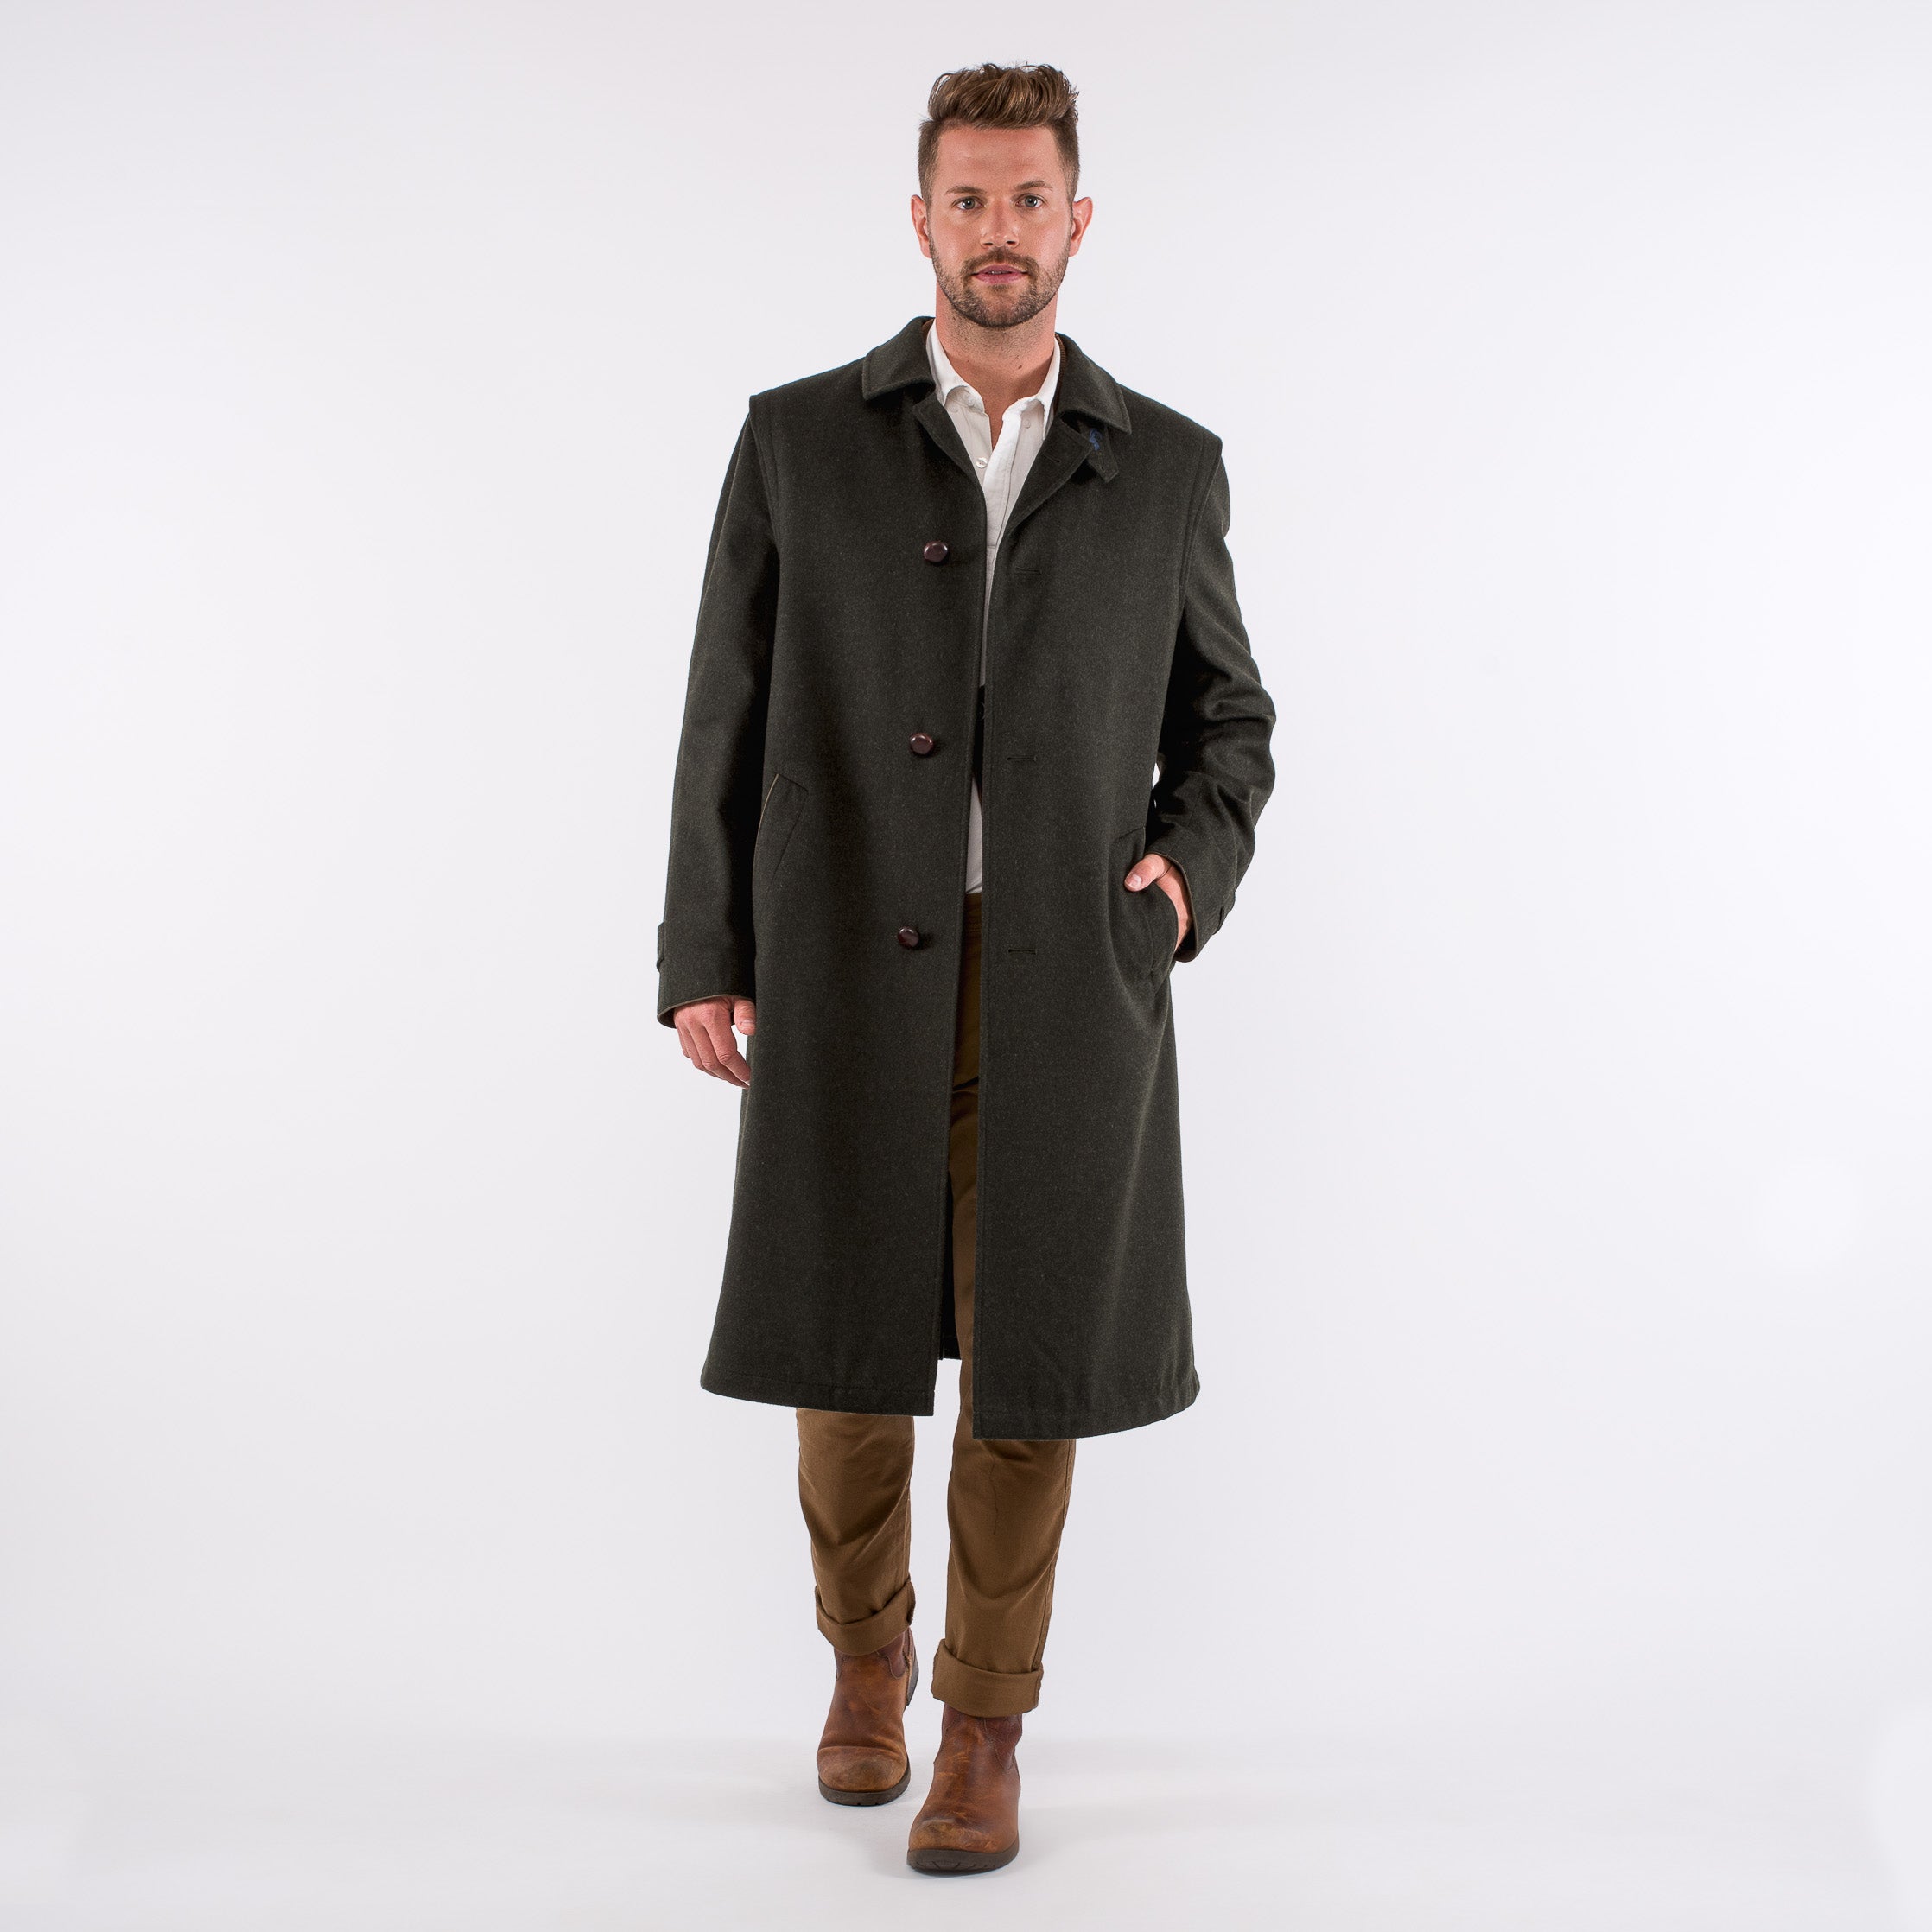 Tirol Traditional Austrian Hunting Loden Wool Overcoat Unlined